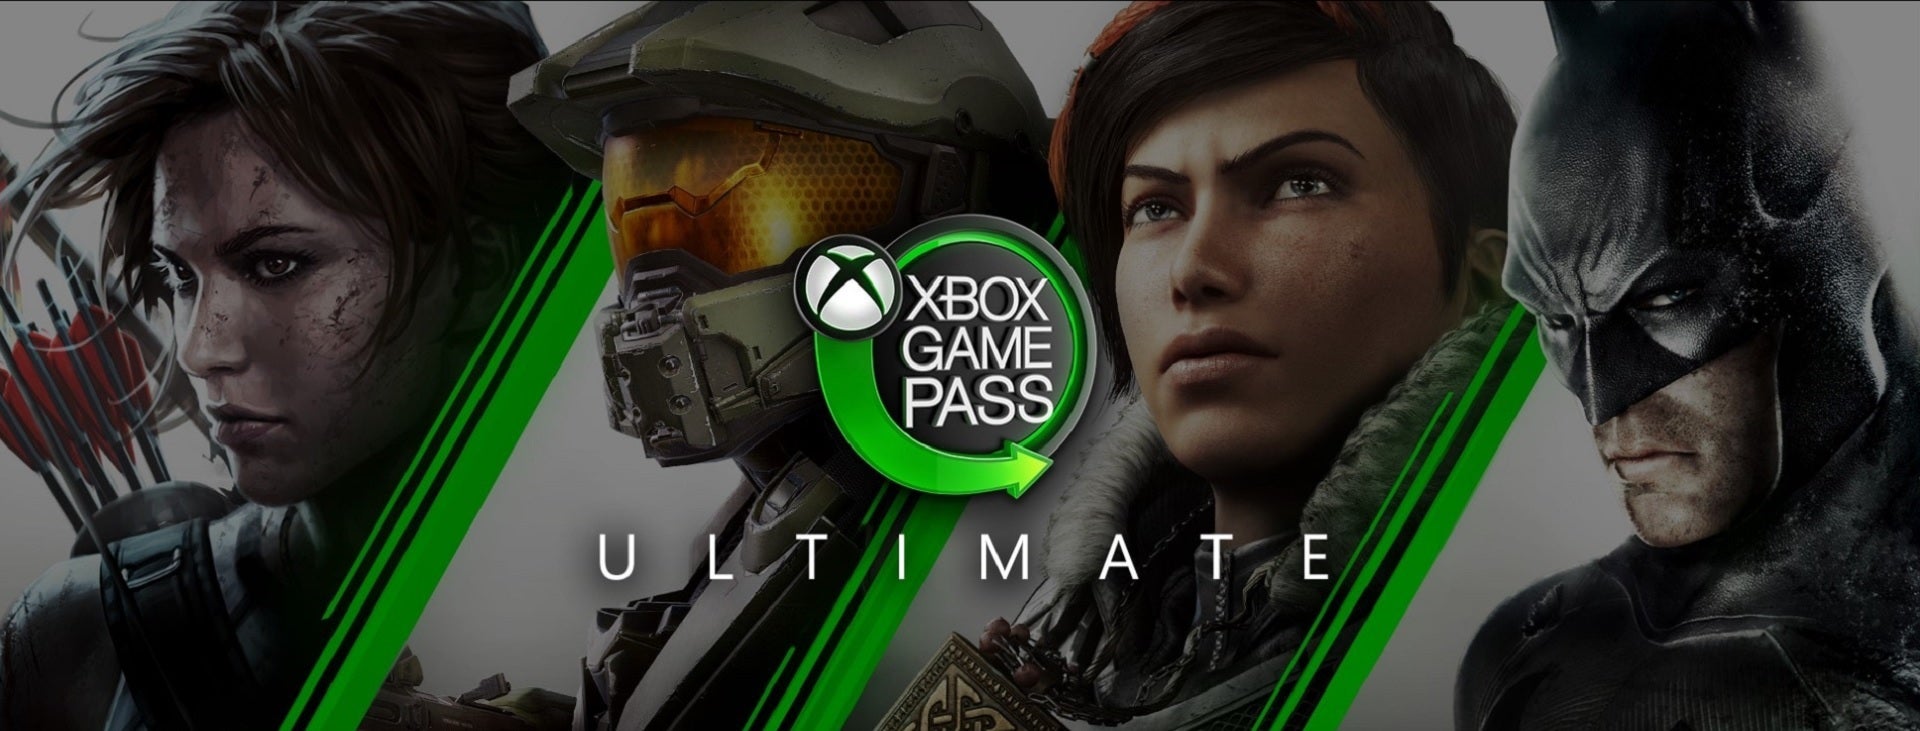 Image for The Medium is the latest example of Game Pass's brilliance